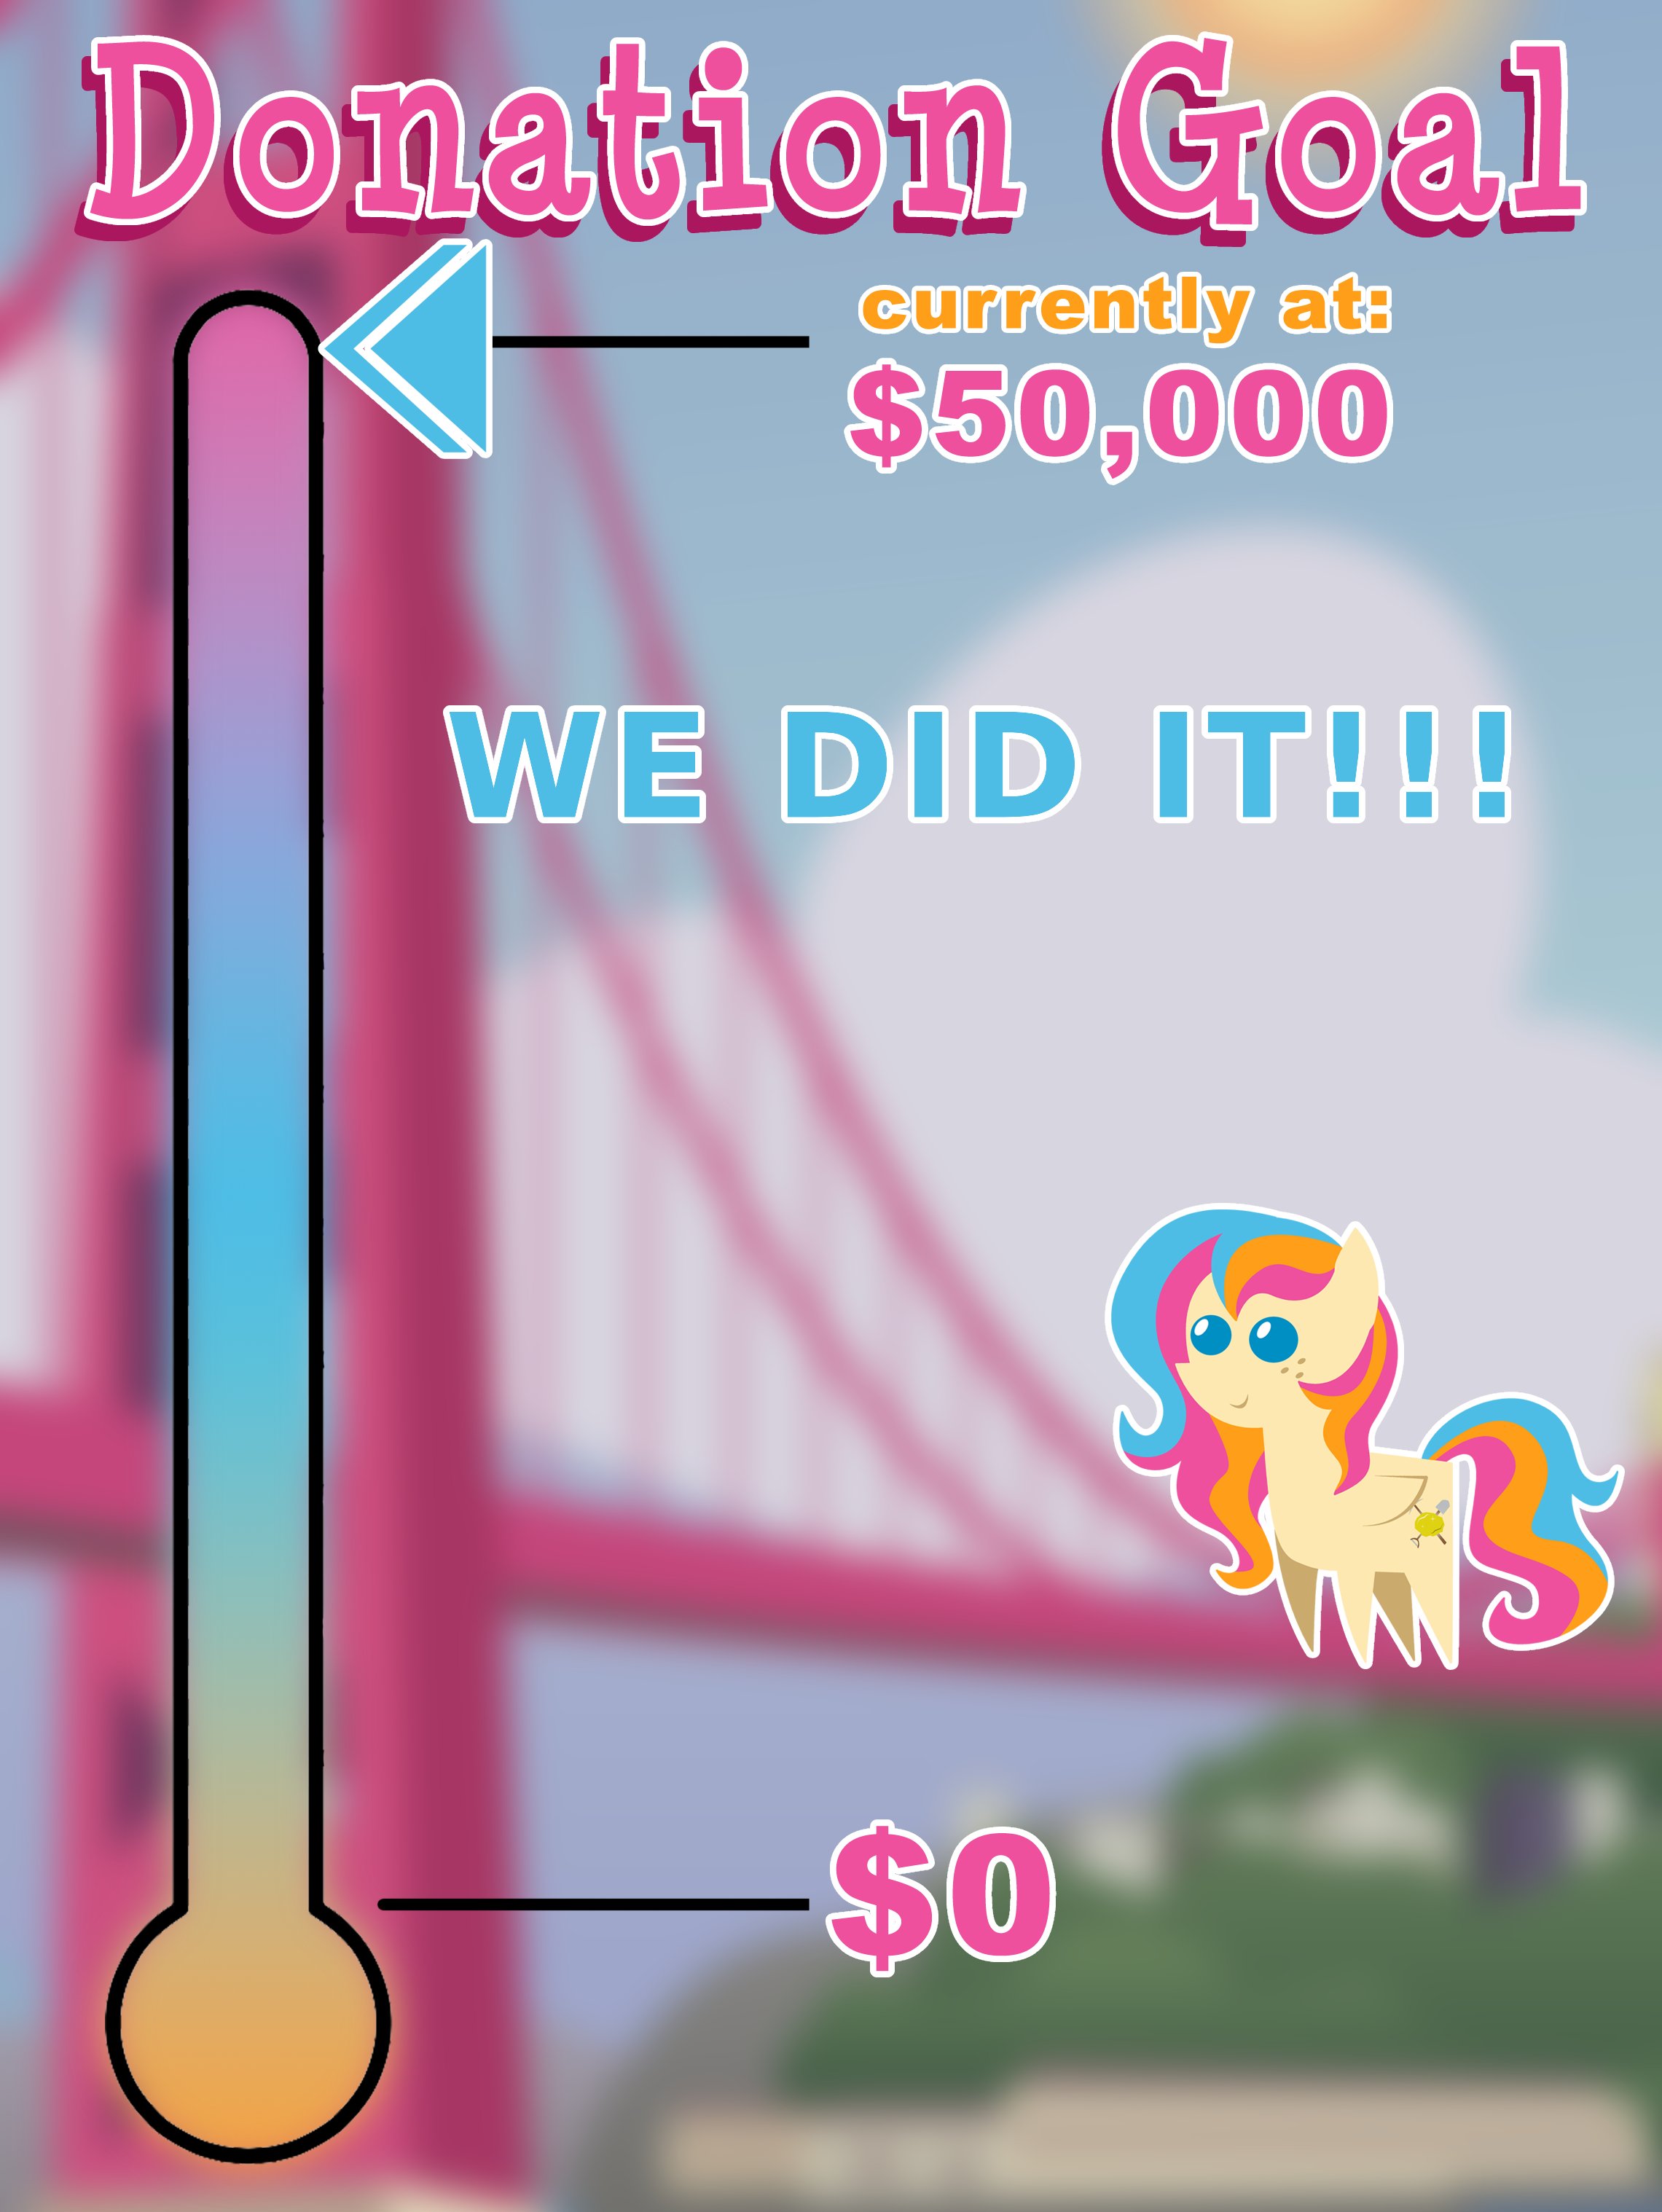 Donation Goal Update 02-14: $50,000 of $50,000 we did it